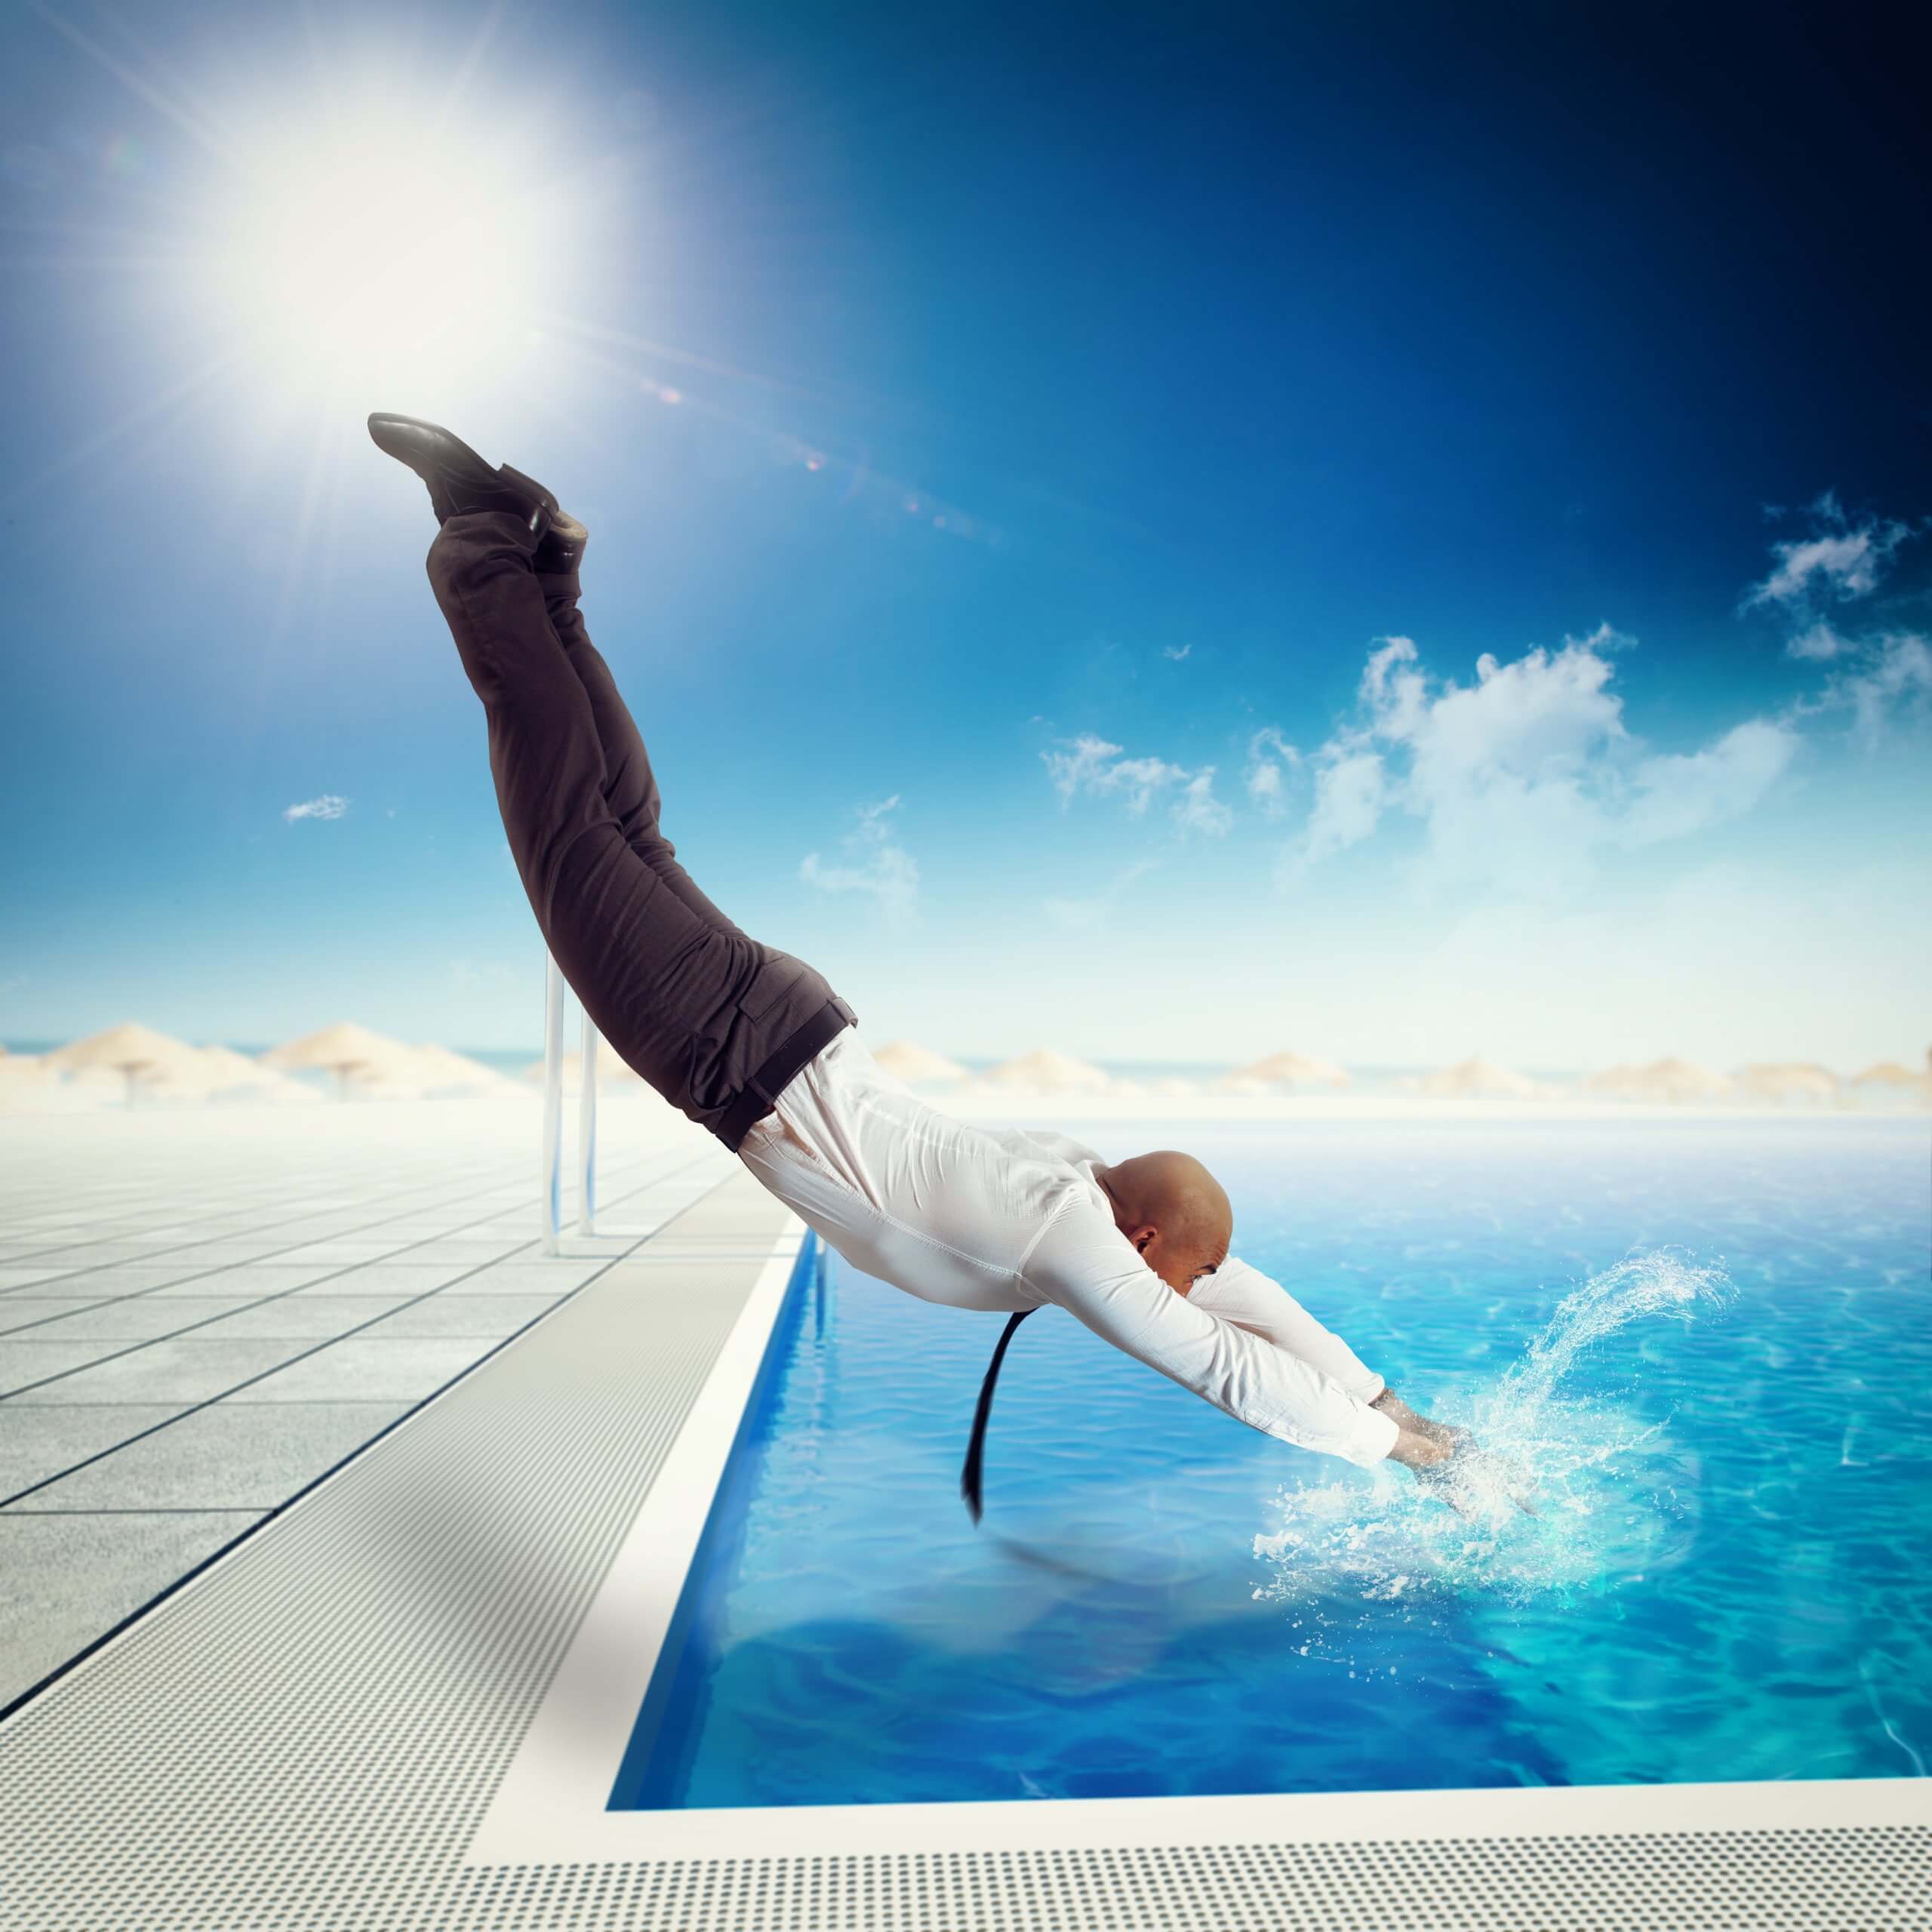 Businessman,Suit,Dives,Into,The,Swimming,Pool